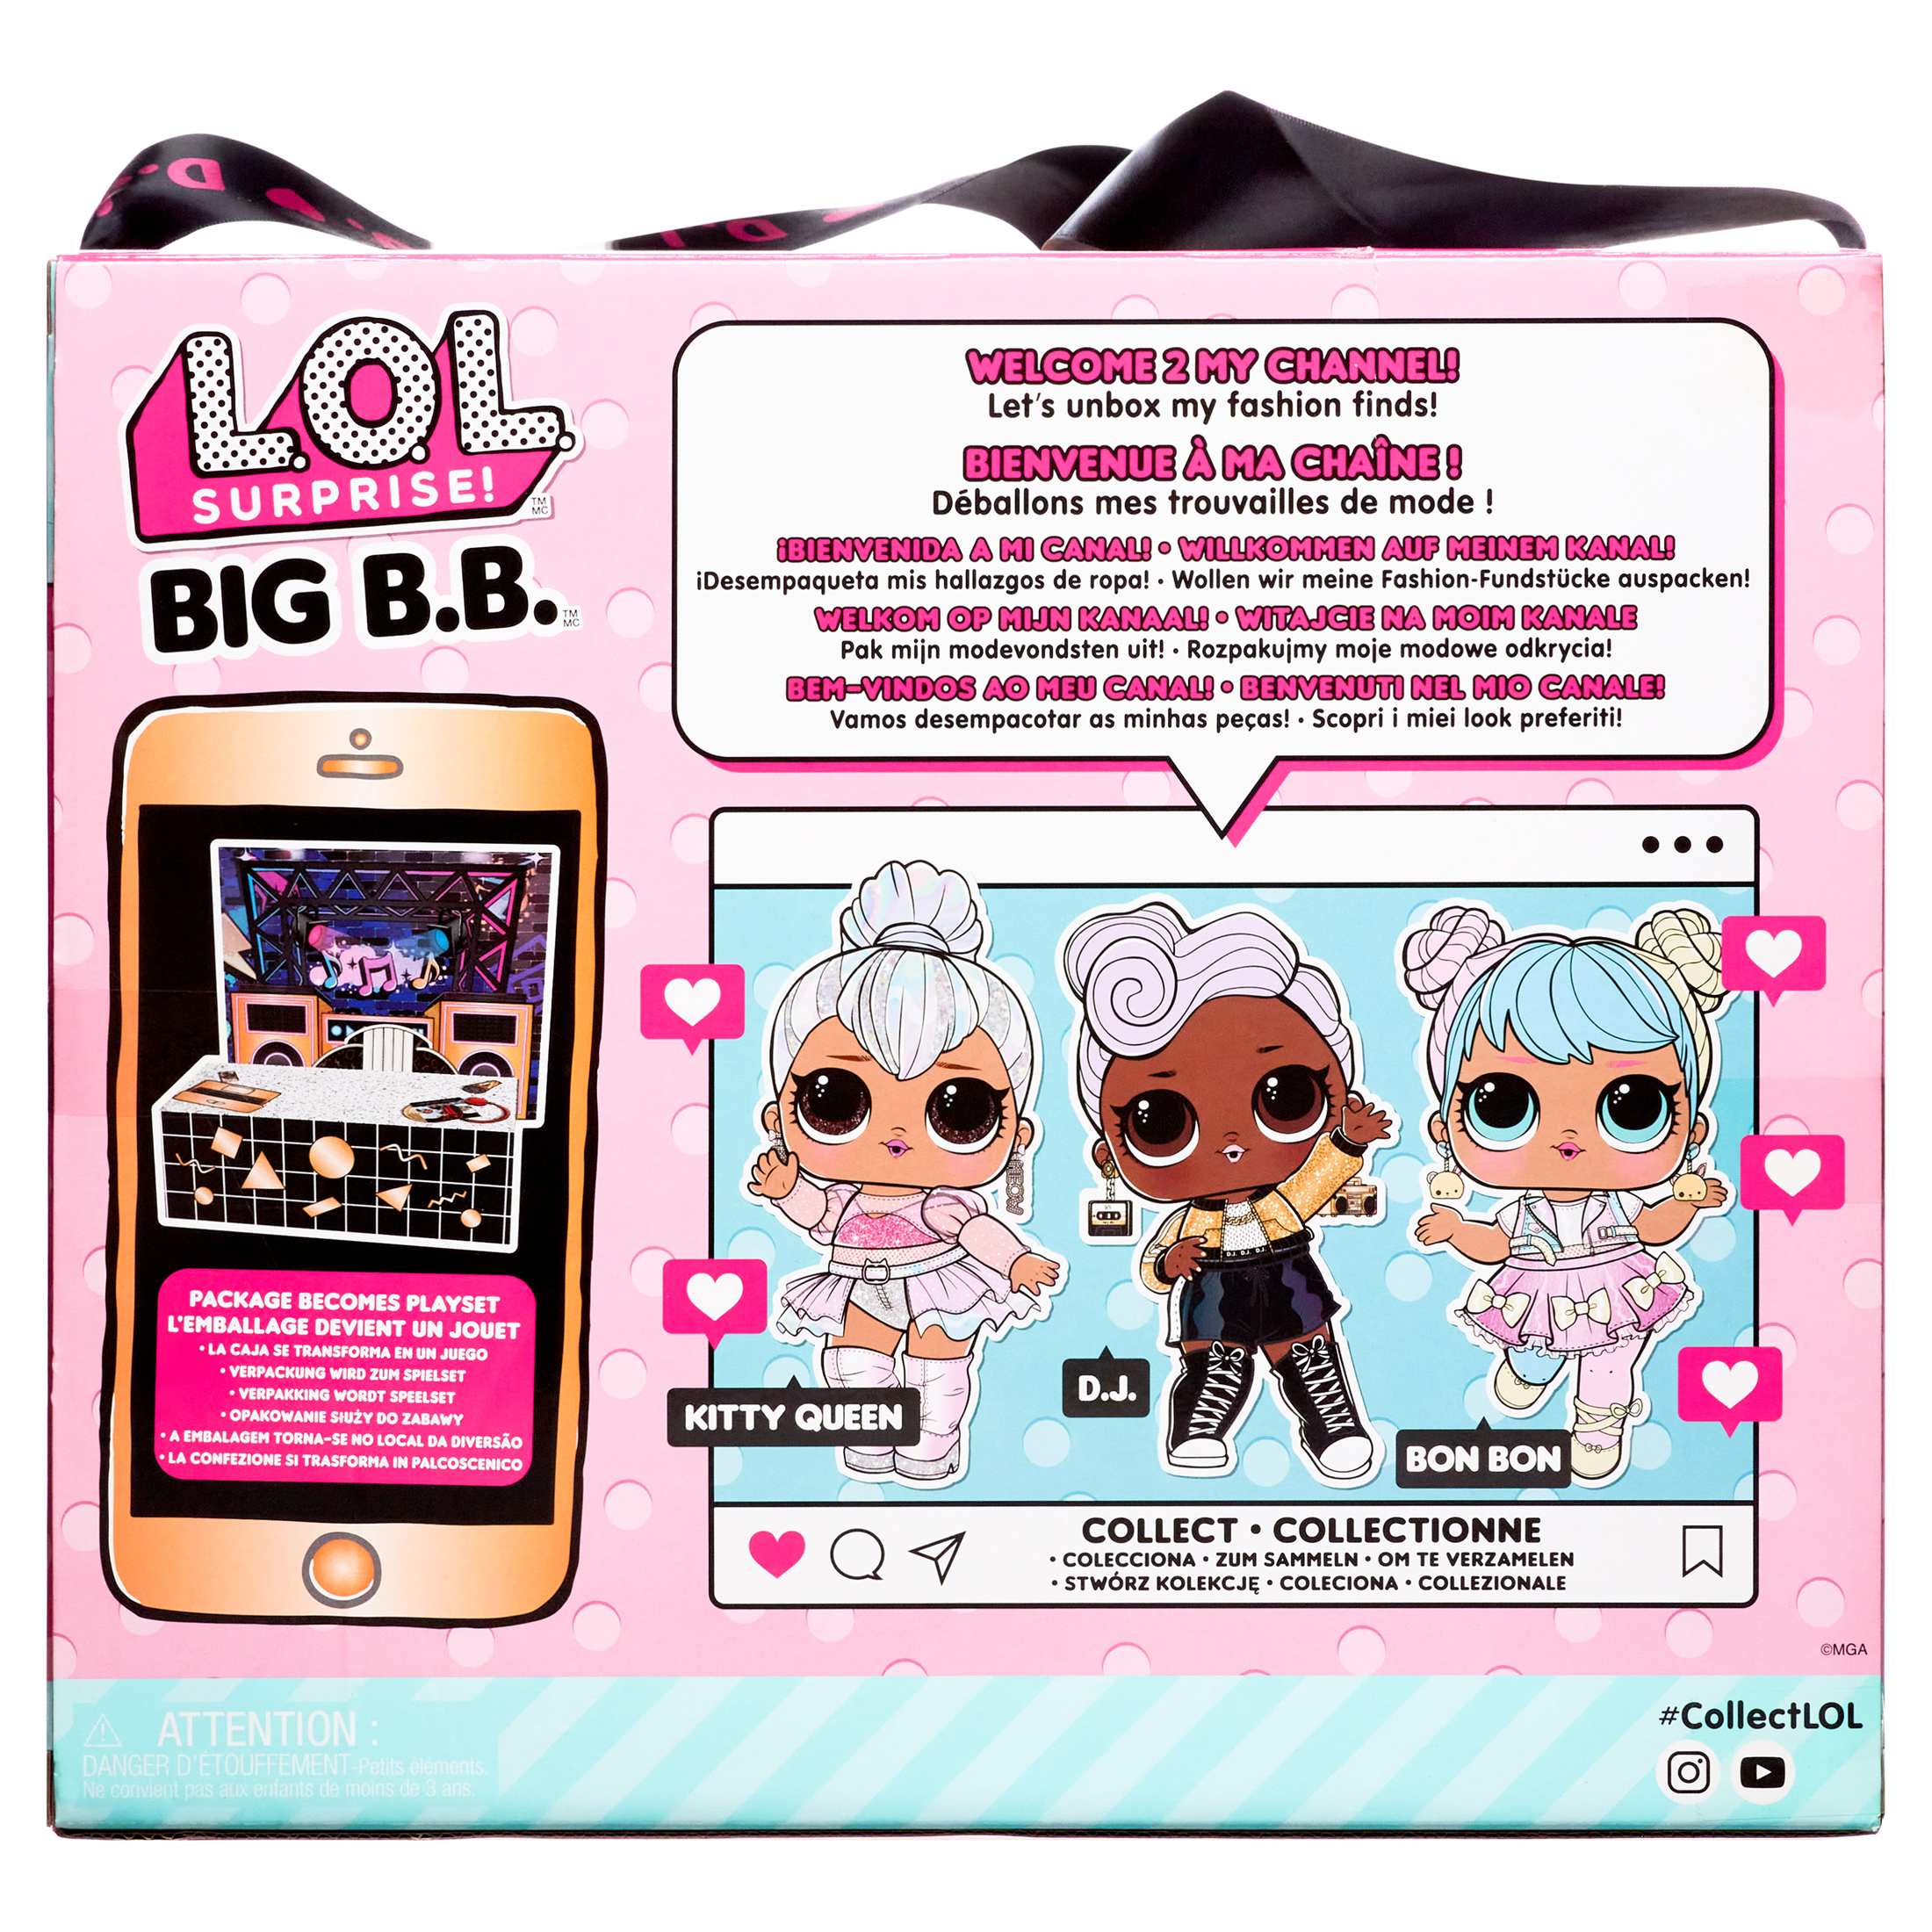 LOL Surprise Big B.B. (Big Baby) D.J. – 11" Large Doll, Unbox Fashions, Shoes, Accessories, Includes Playset Desk, Chair and Backdrop - image 7 of 8